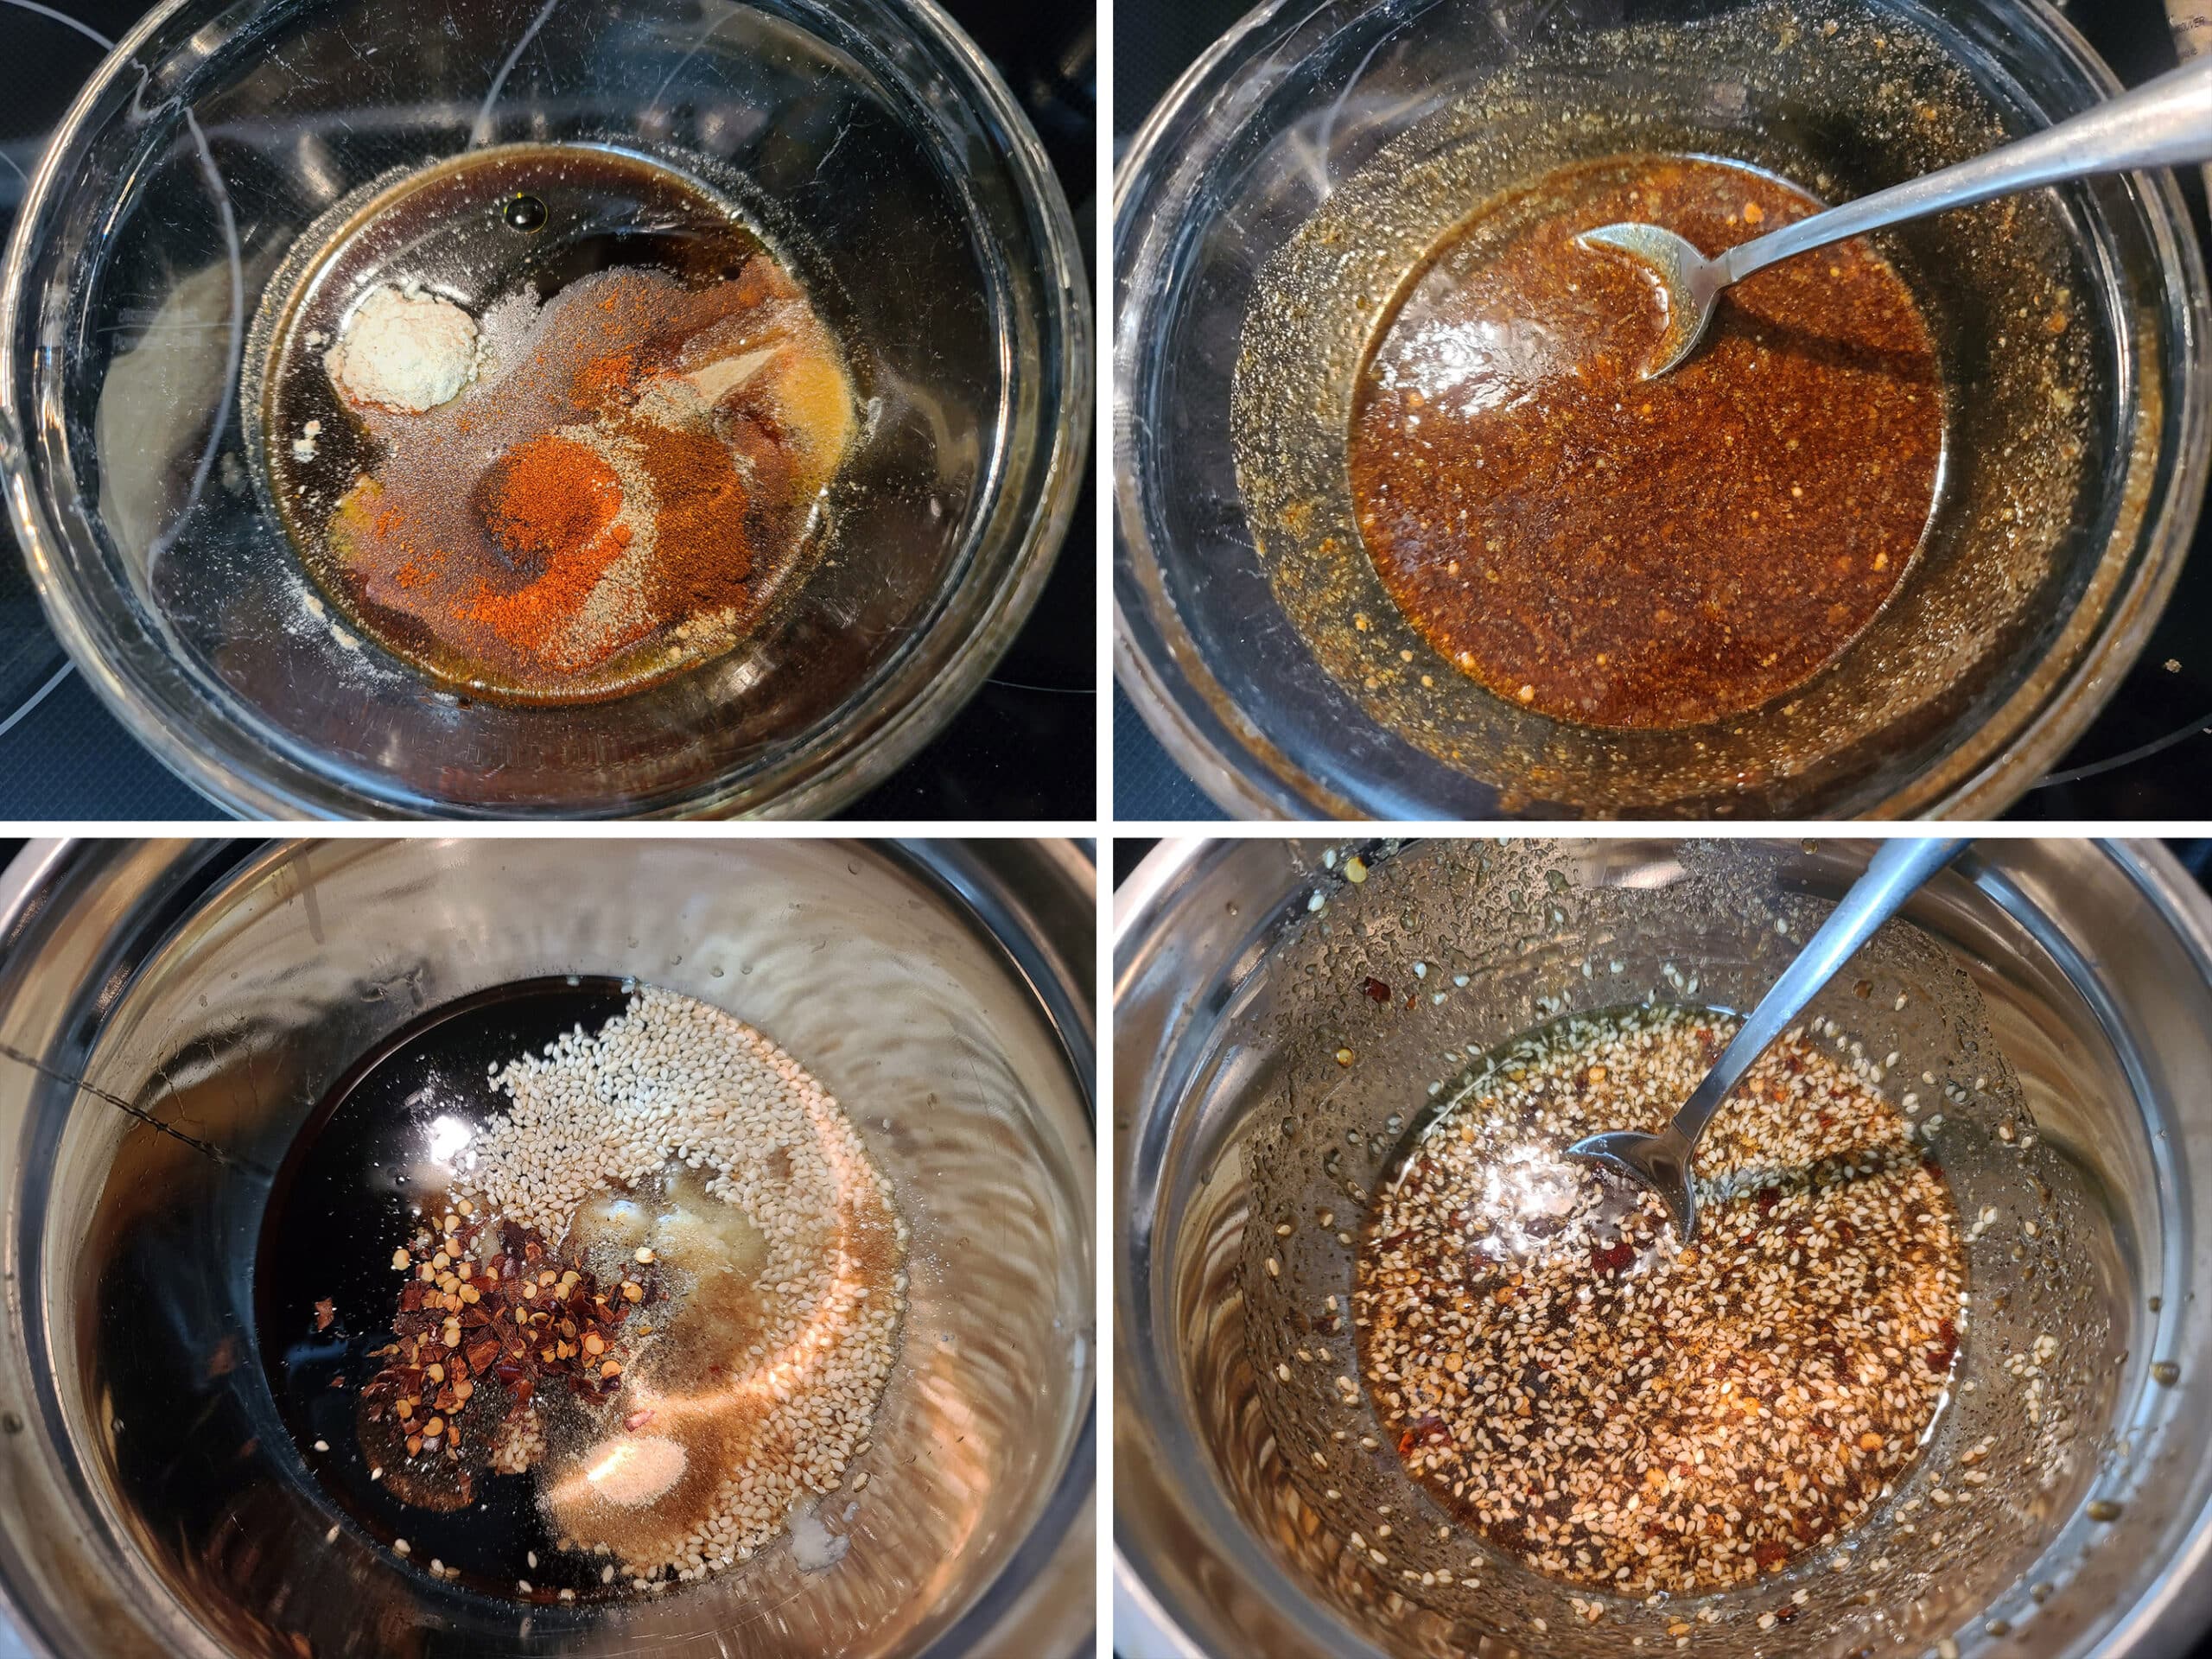 2 part image showing the two different marinades being mixed up in glass bowls.